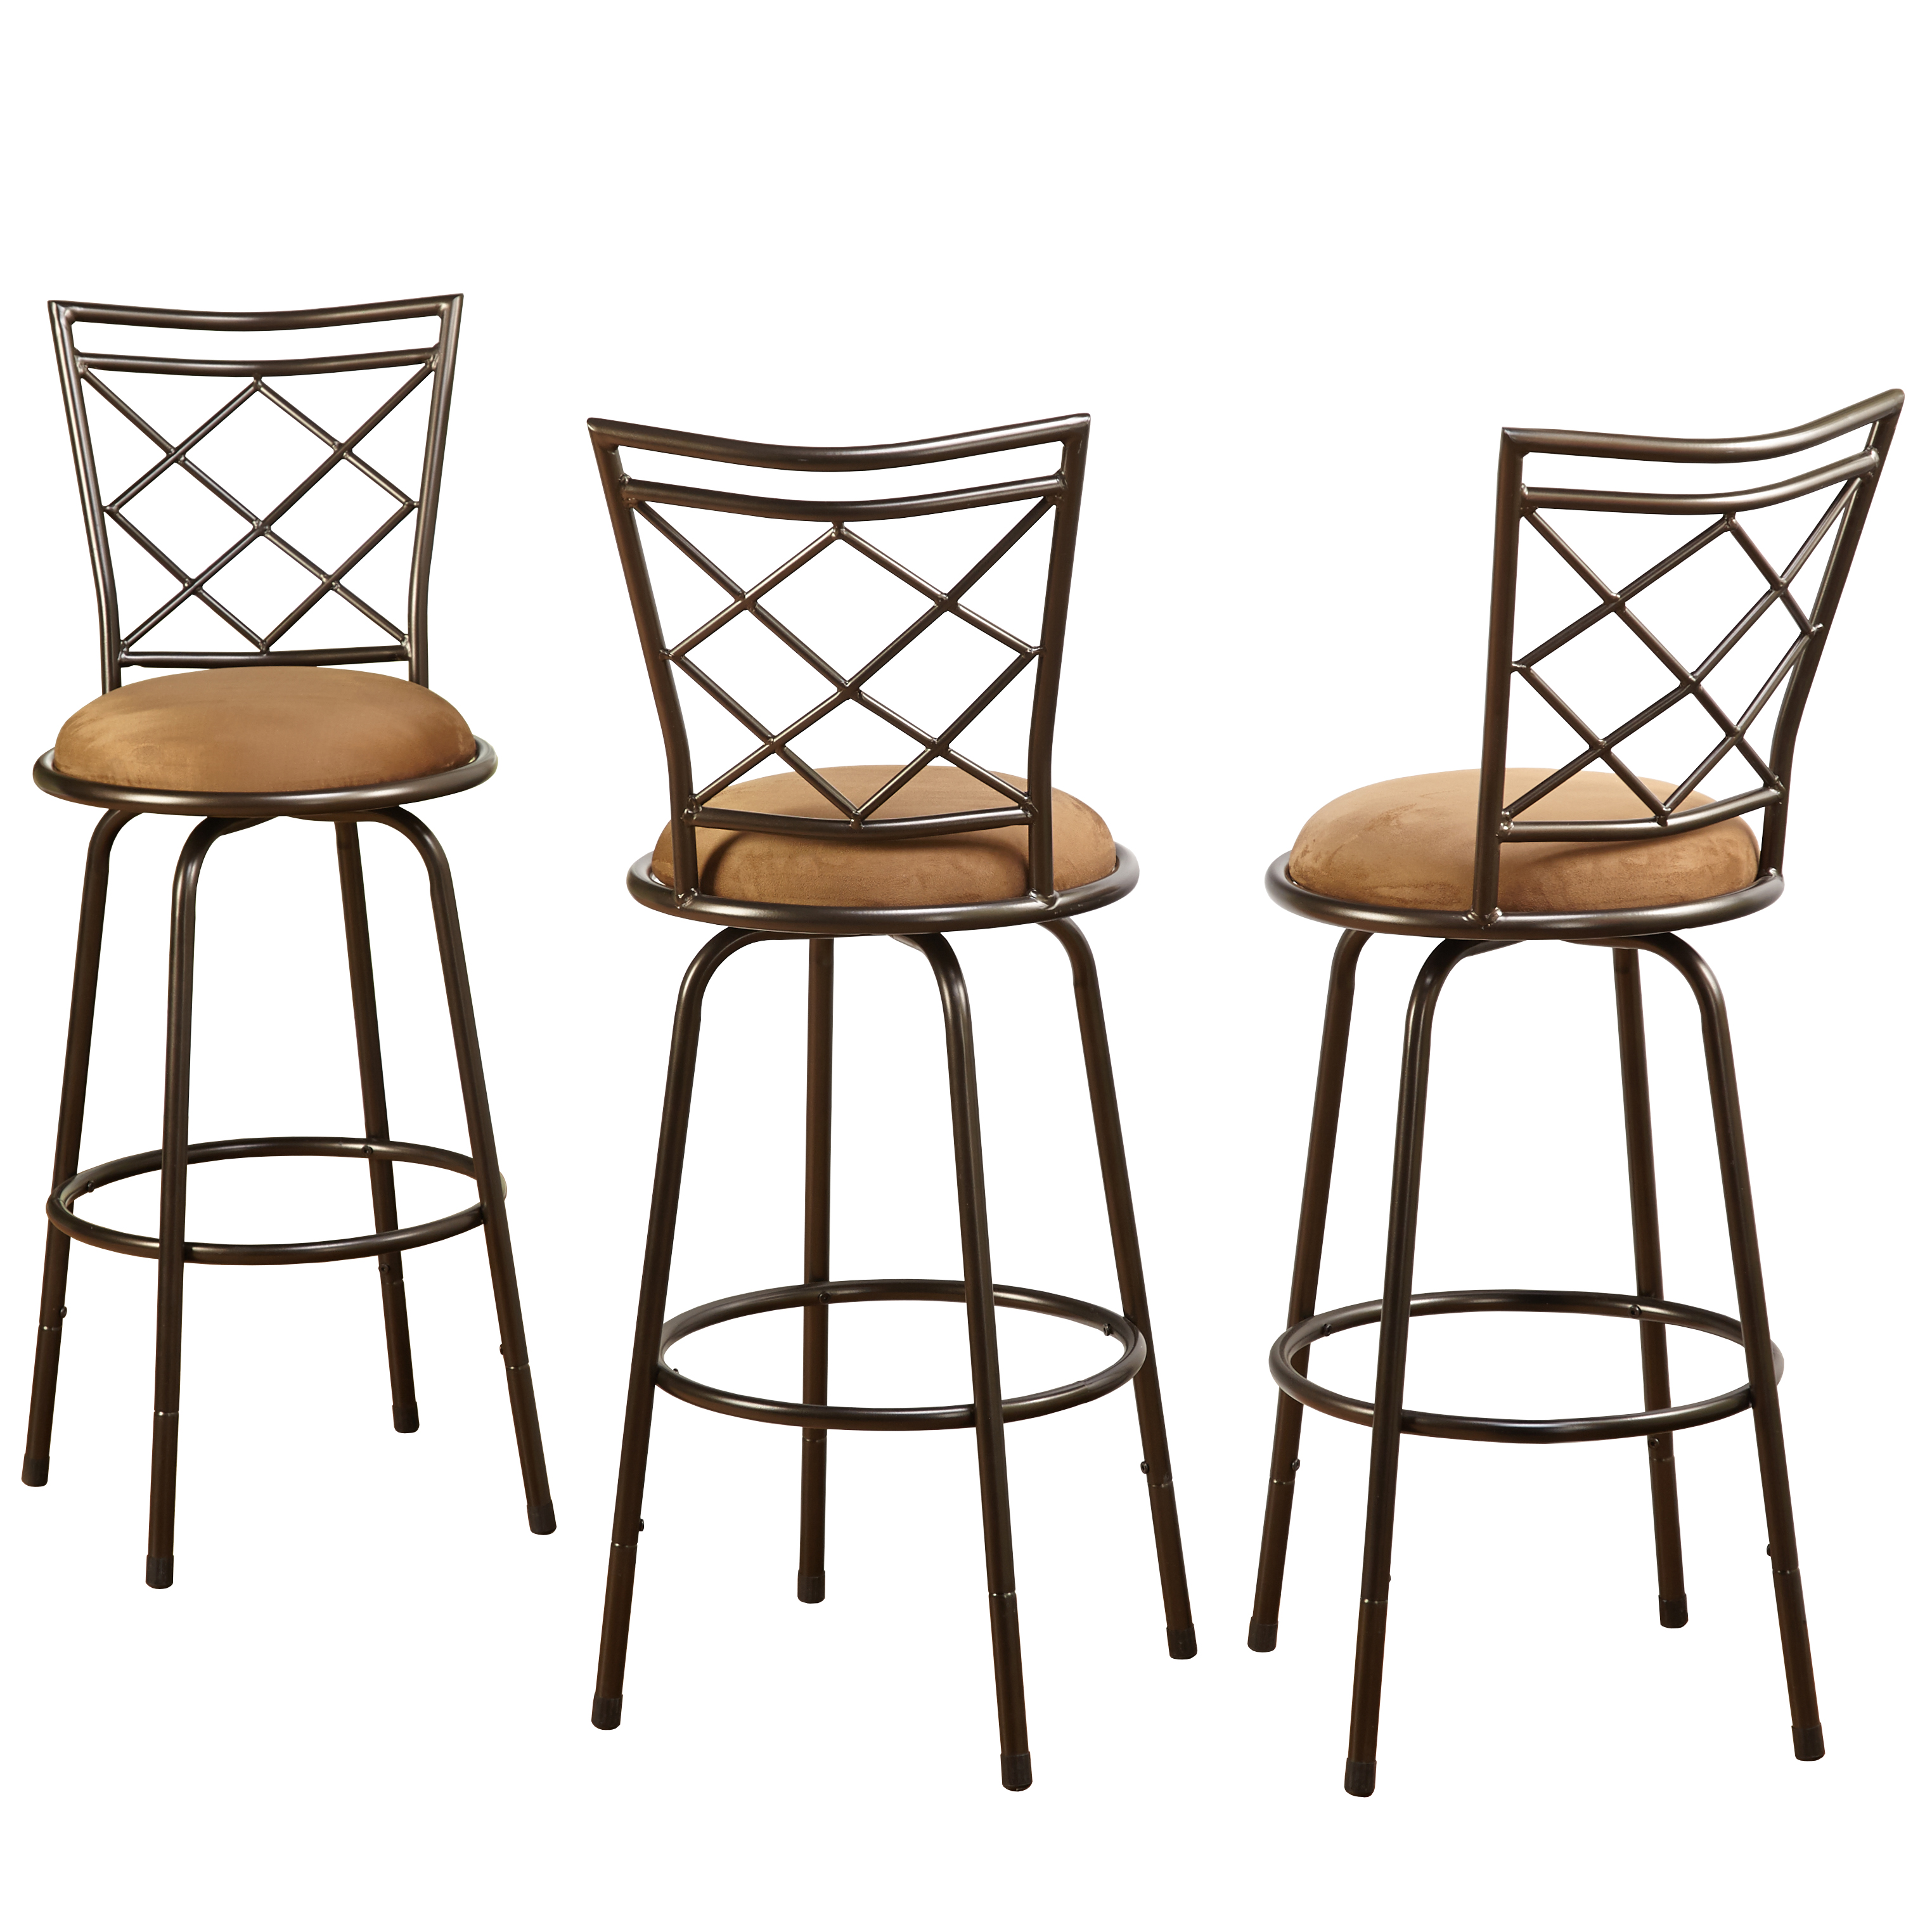 TMS Avery Bar Stool with Swivel & Adjustable Height, Brown, Set of 3 - image 3 of 3